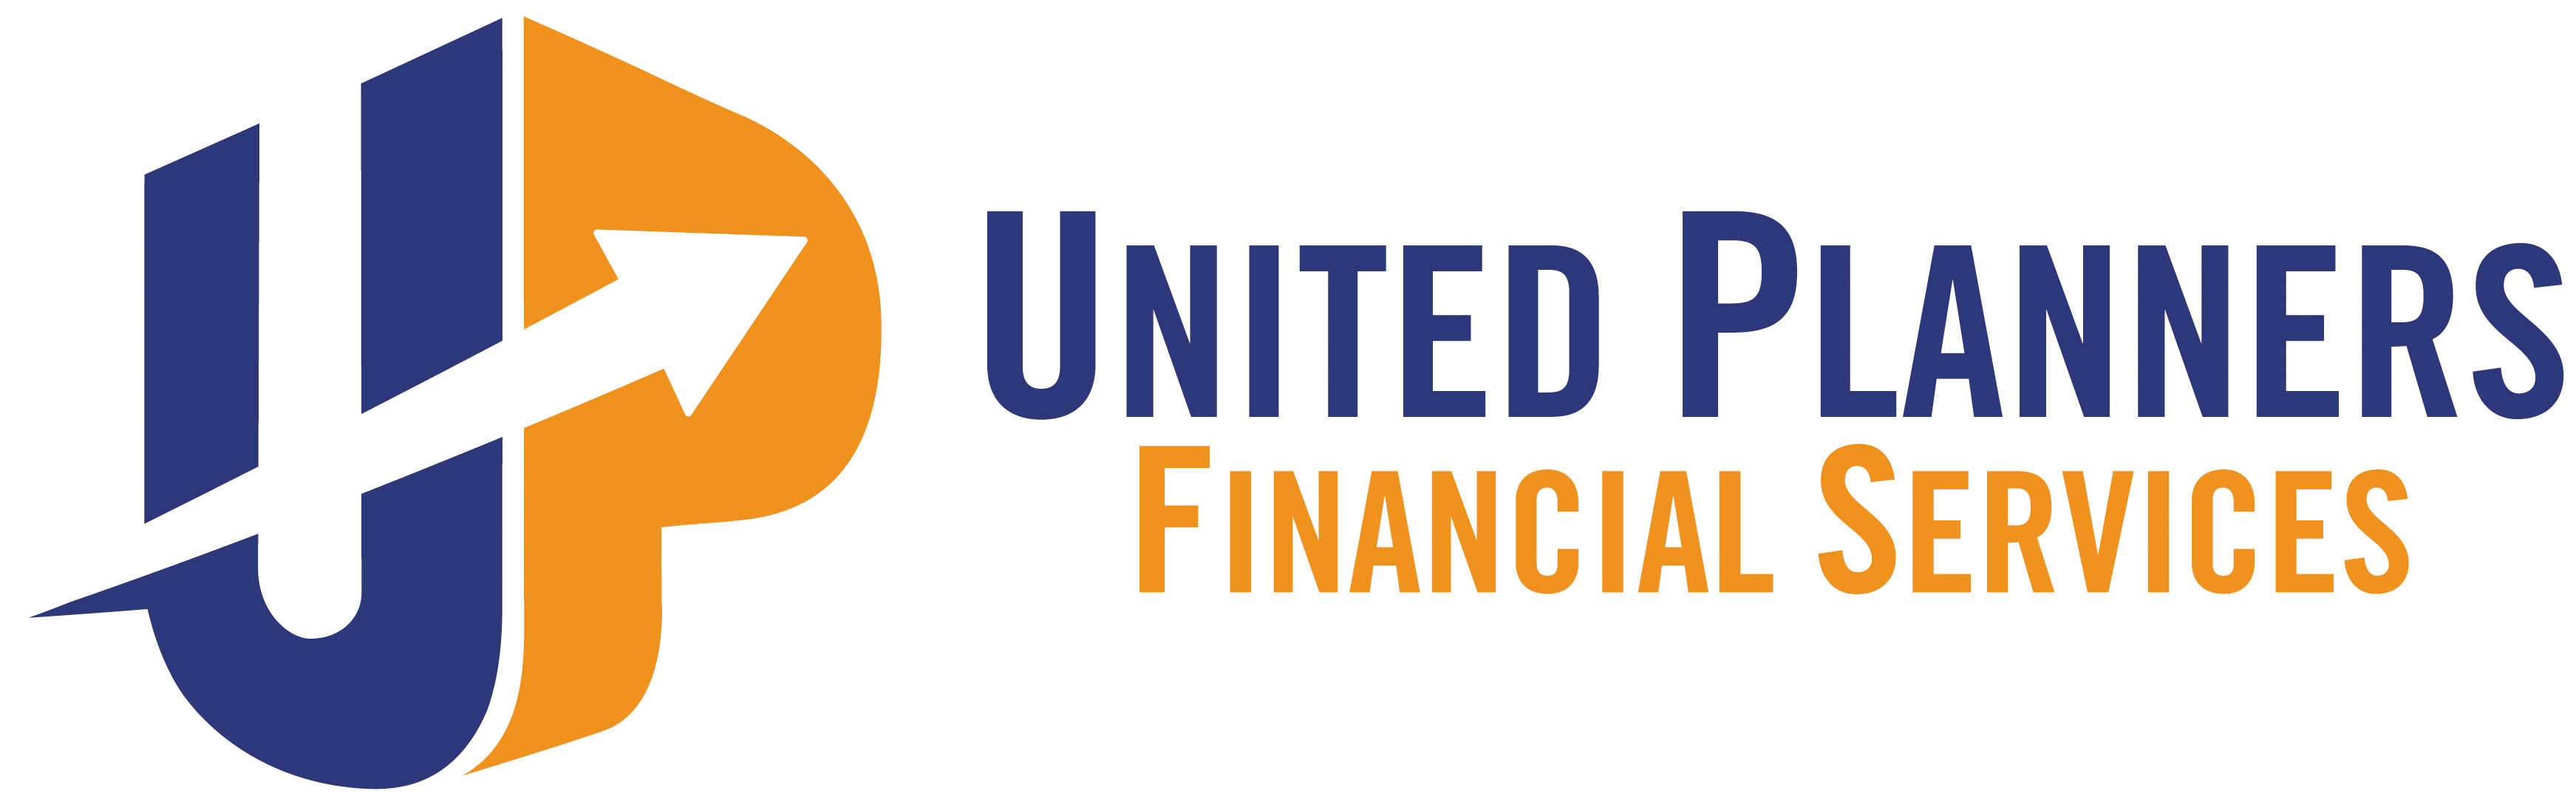 United Planners Financial Services logo